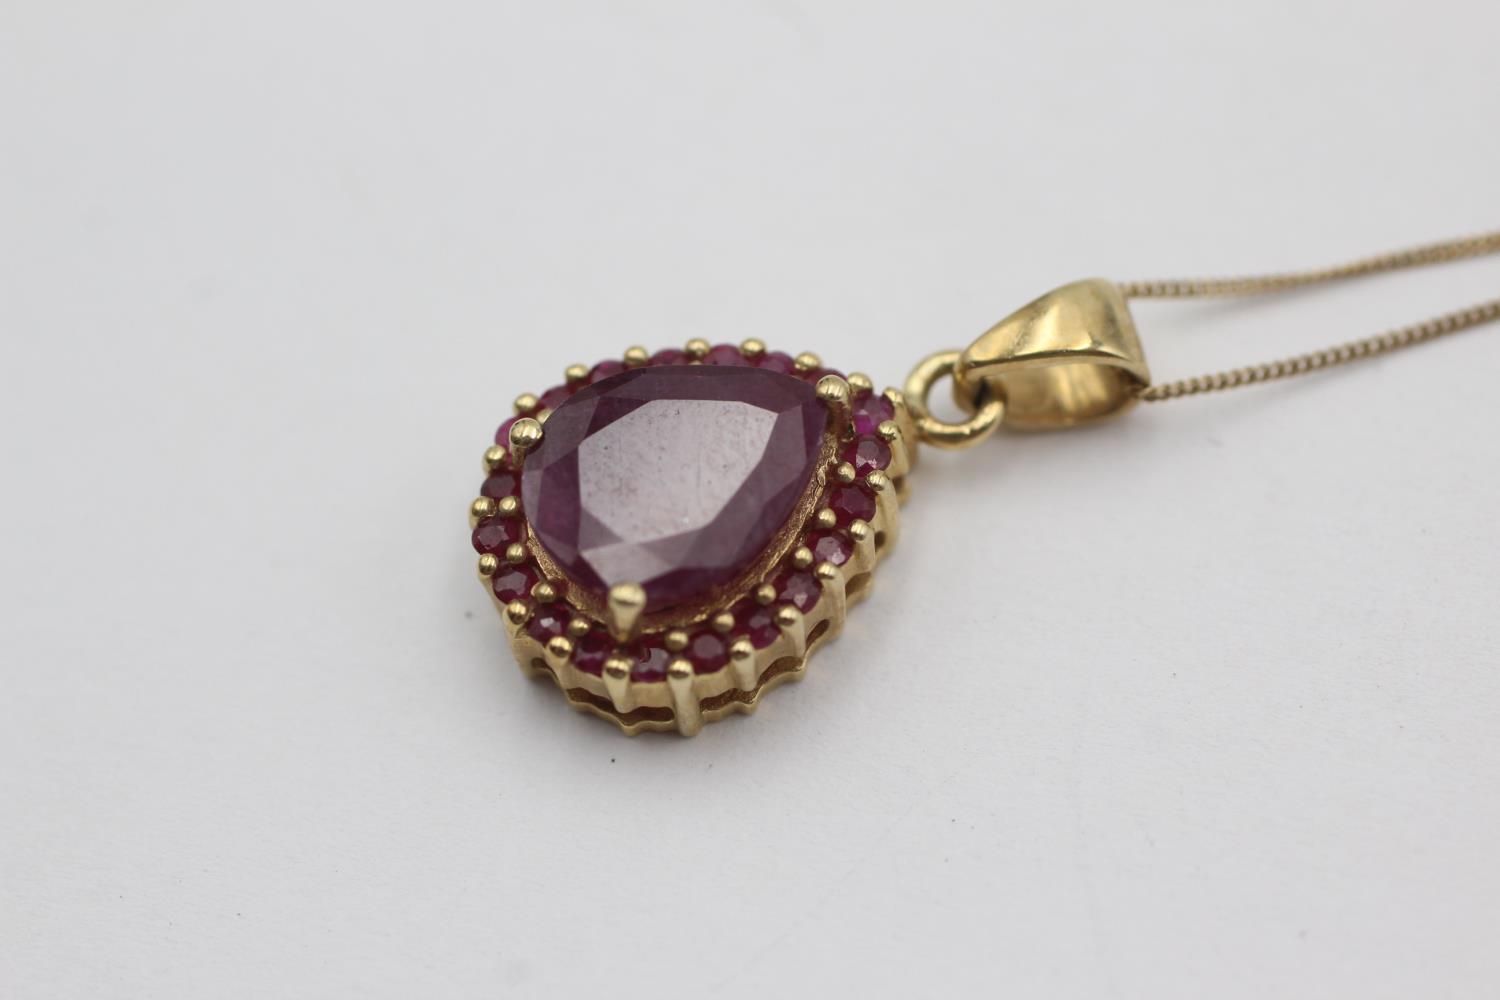 9ct gold ruby pendant necklace (2.8g) - Image 2 of 4